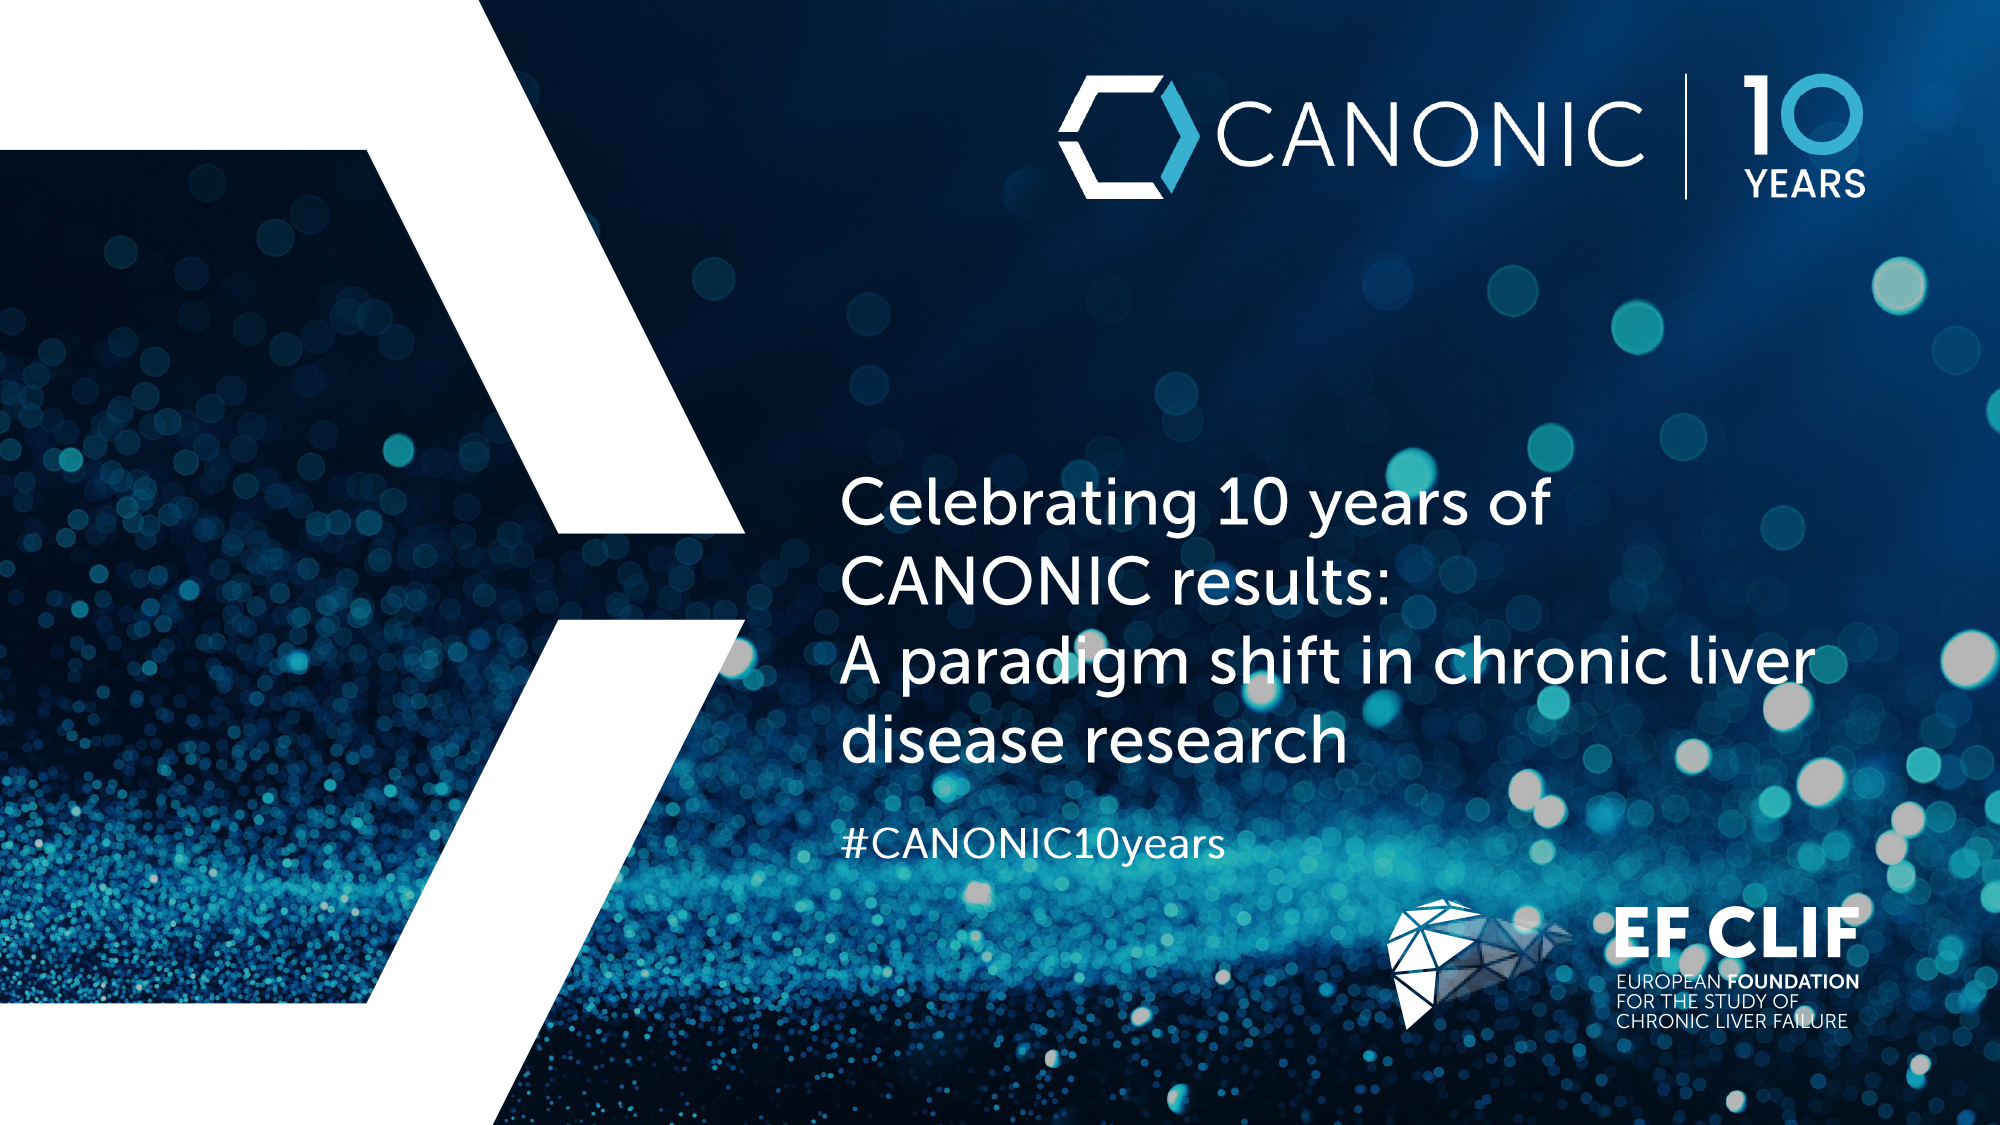 Celebrating 10 years of CANONIC: A paradigm shift in chronic liver disease research